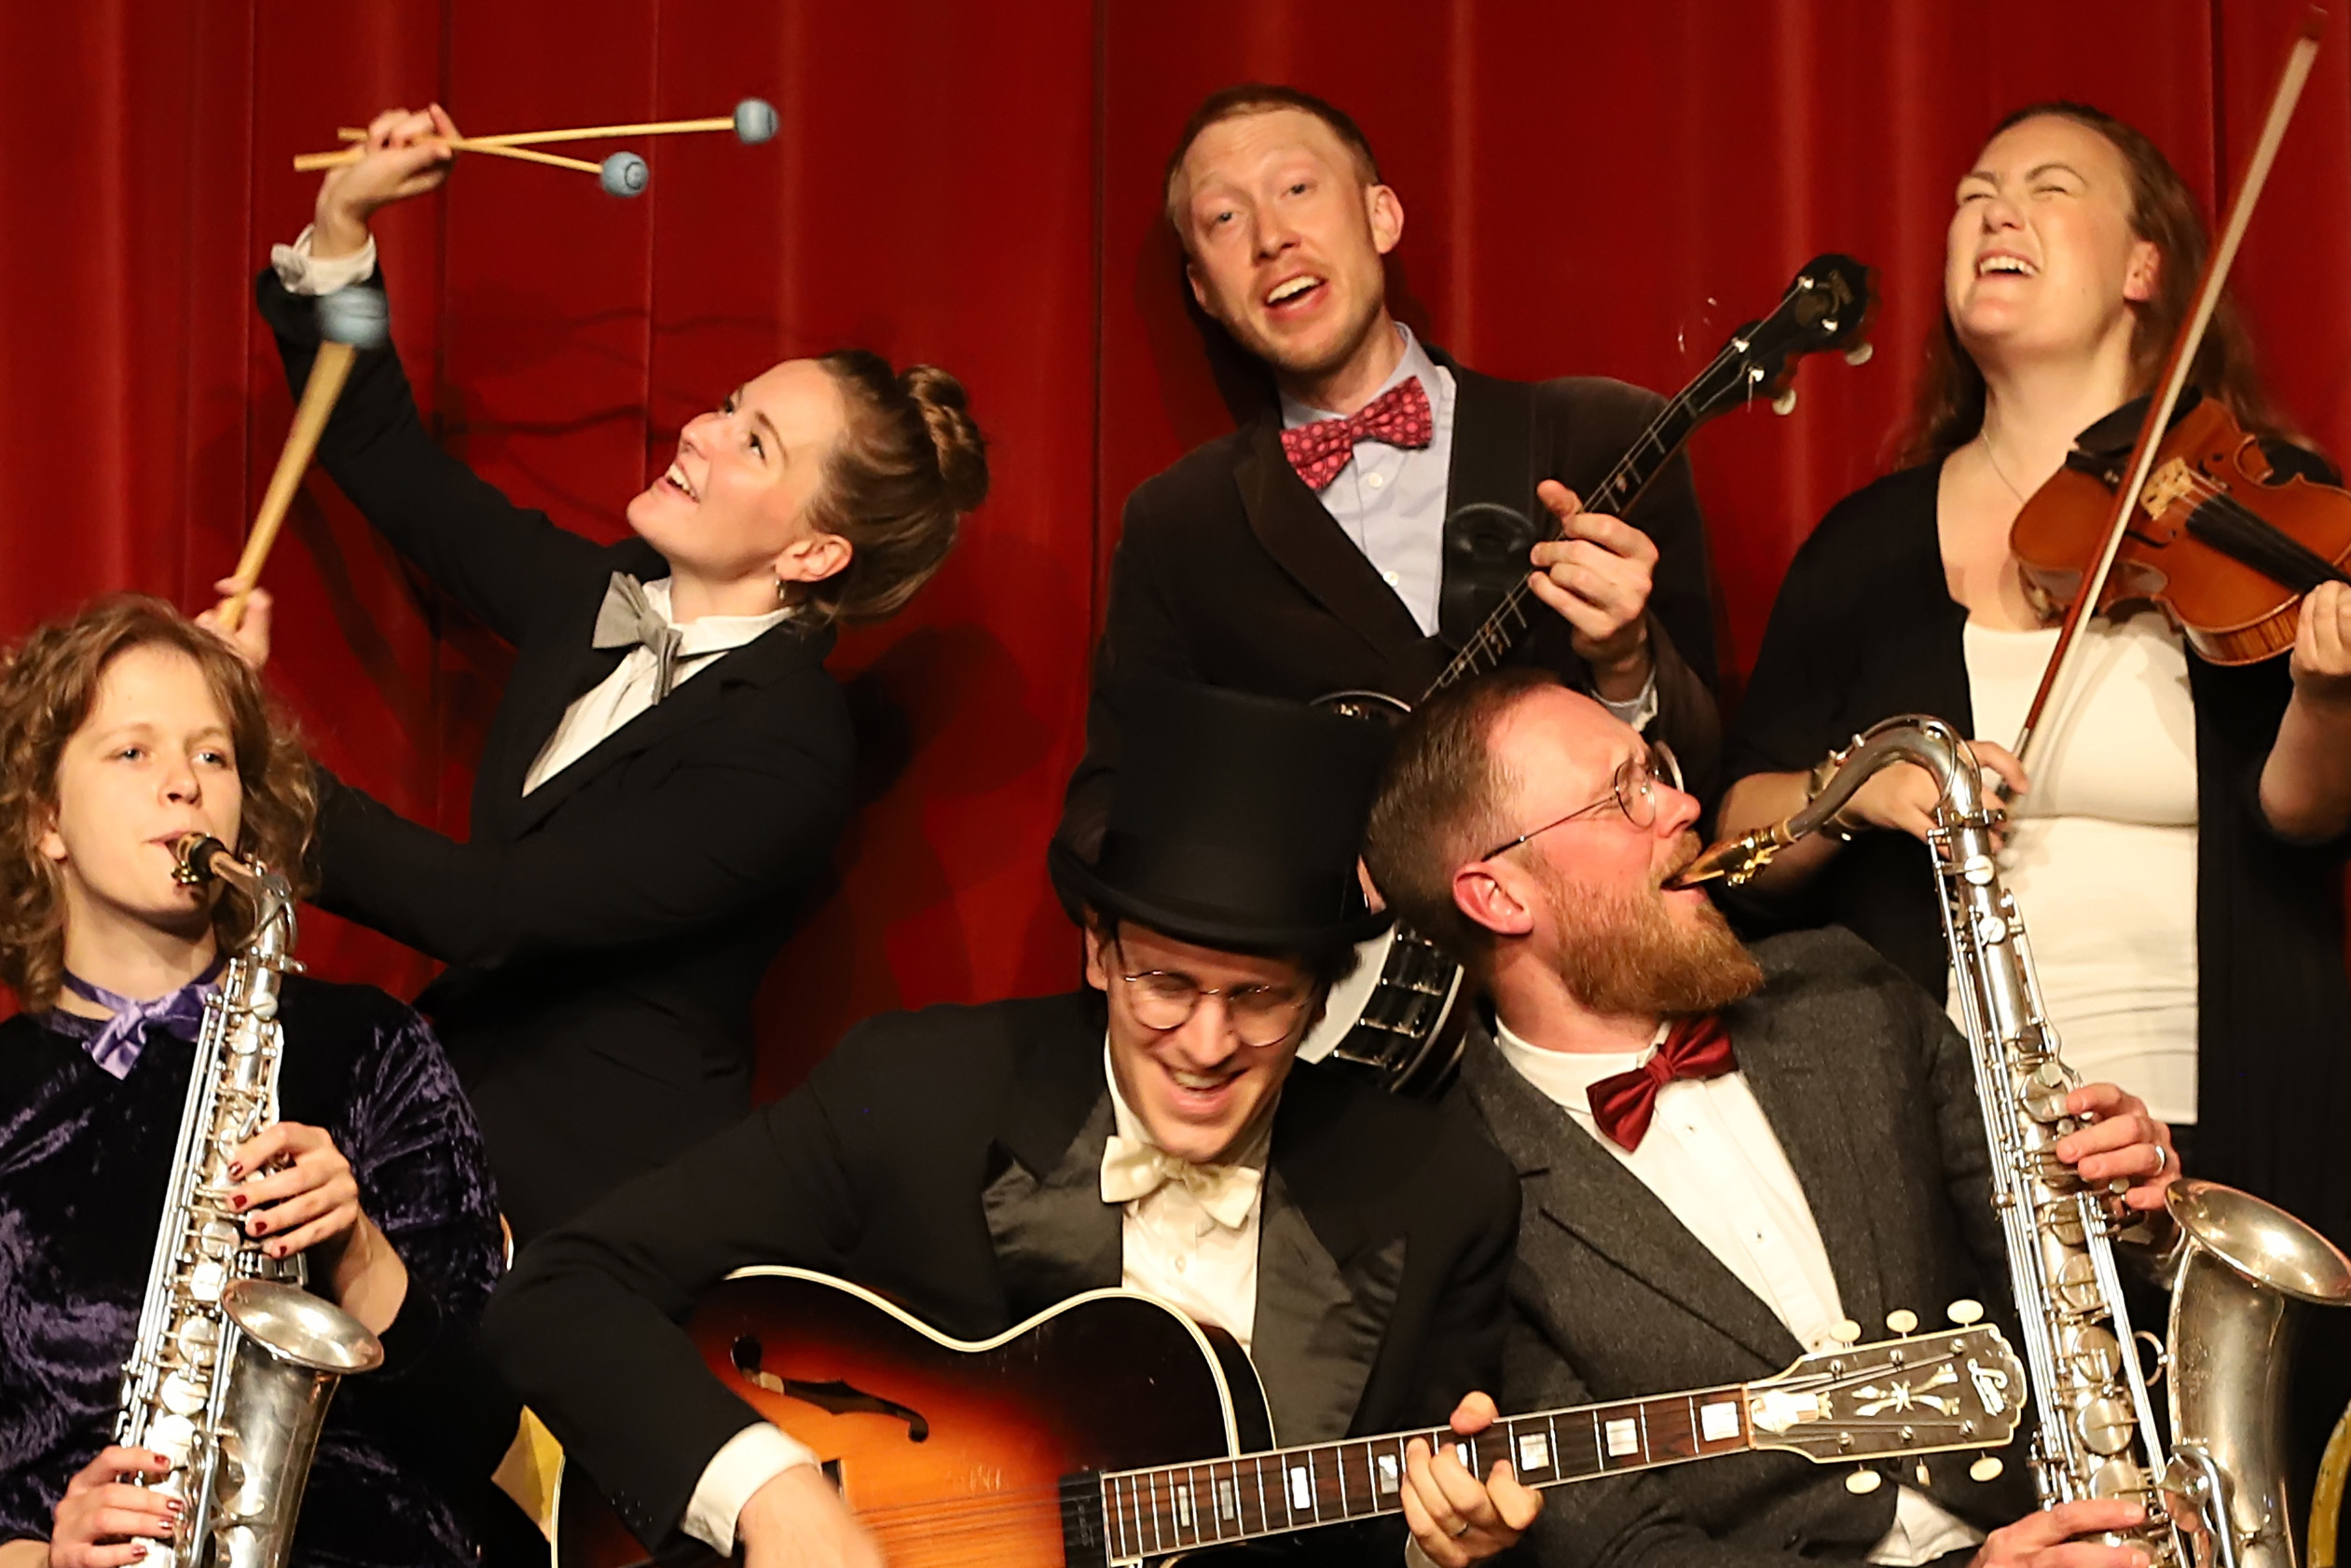  Cats & Dinosaurs<br>The left-wing and feminist swing collective plays original Lindyhop dance music with political lyrics in Swedish and English.